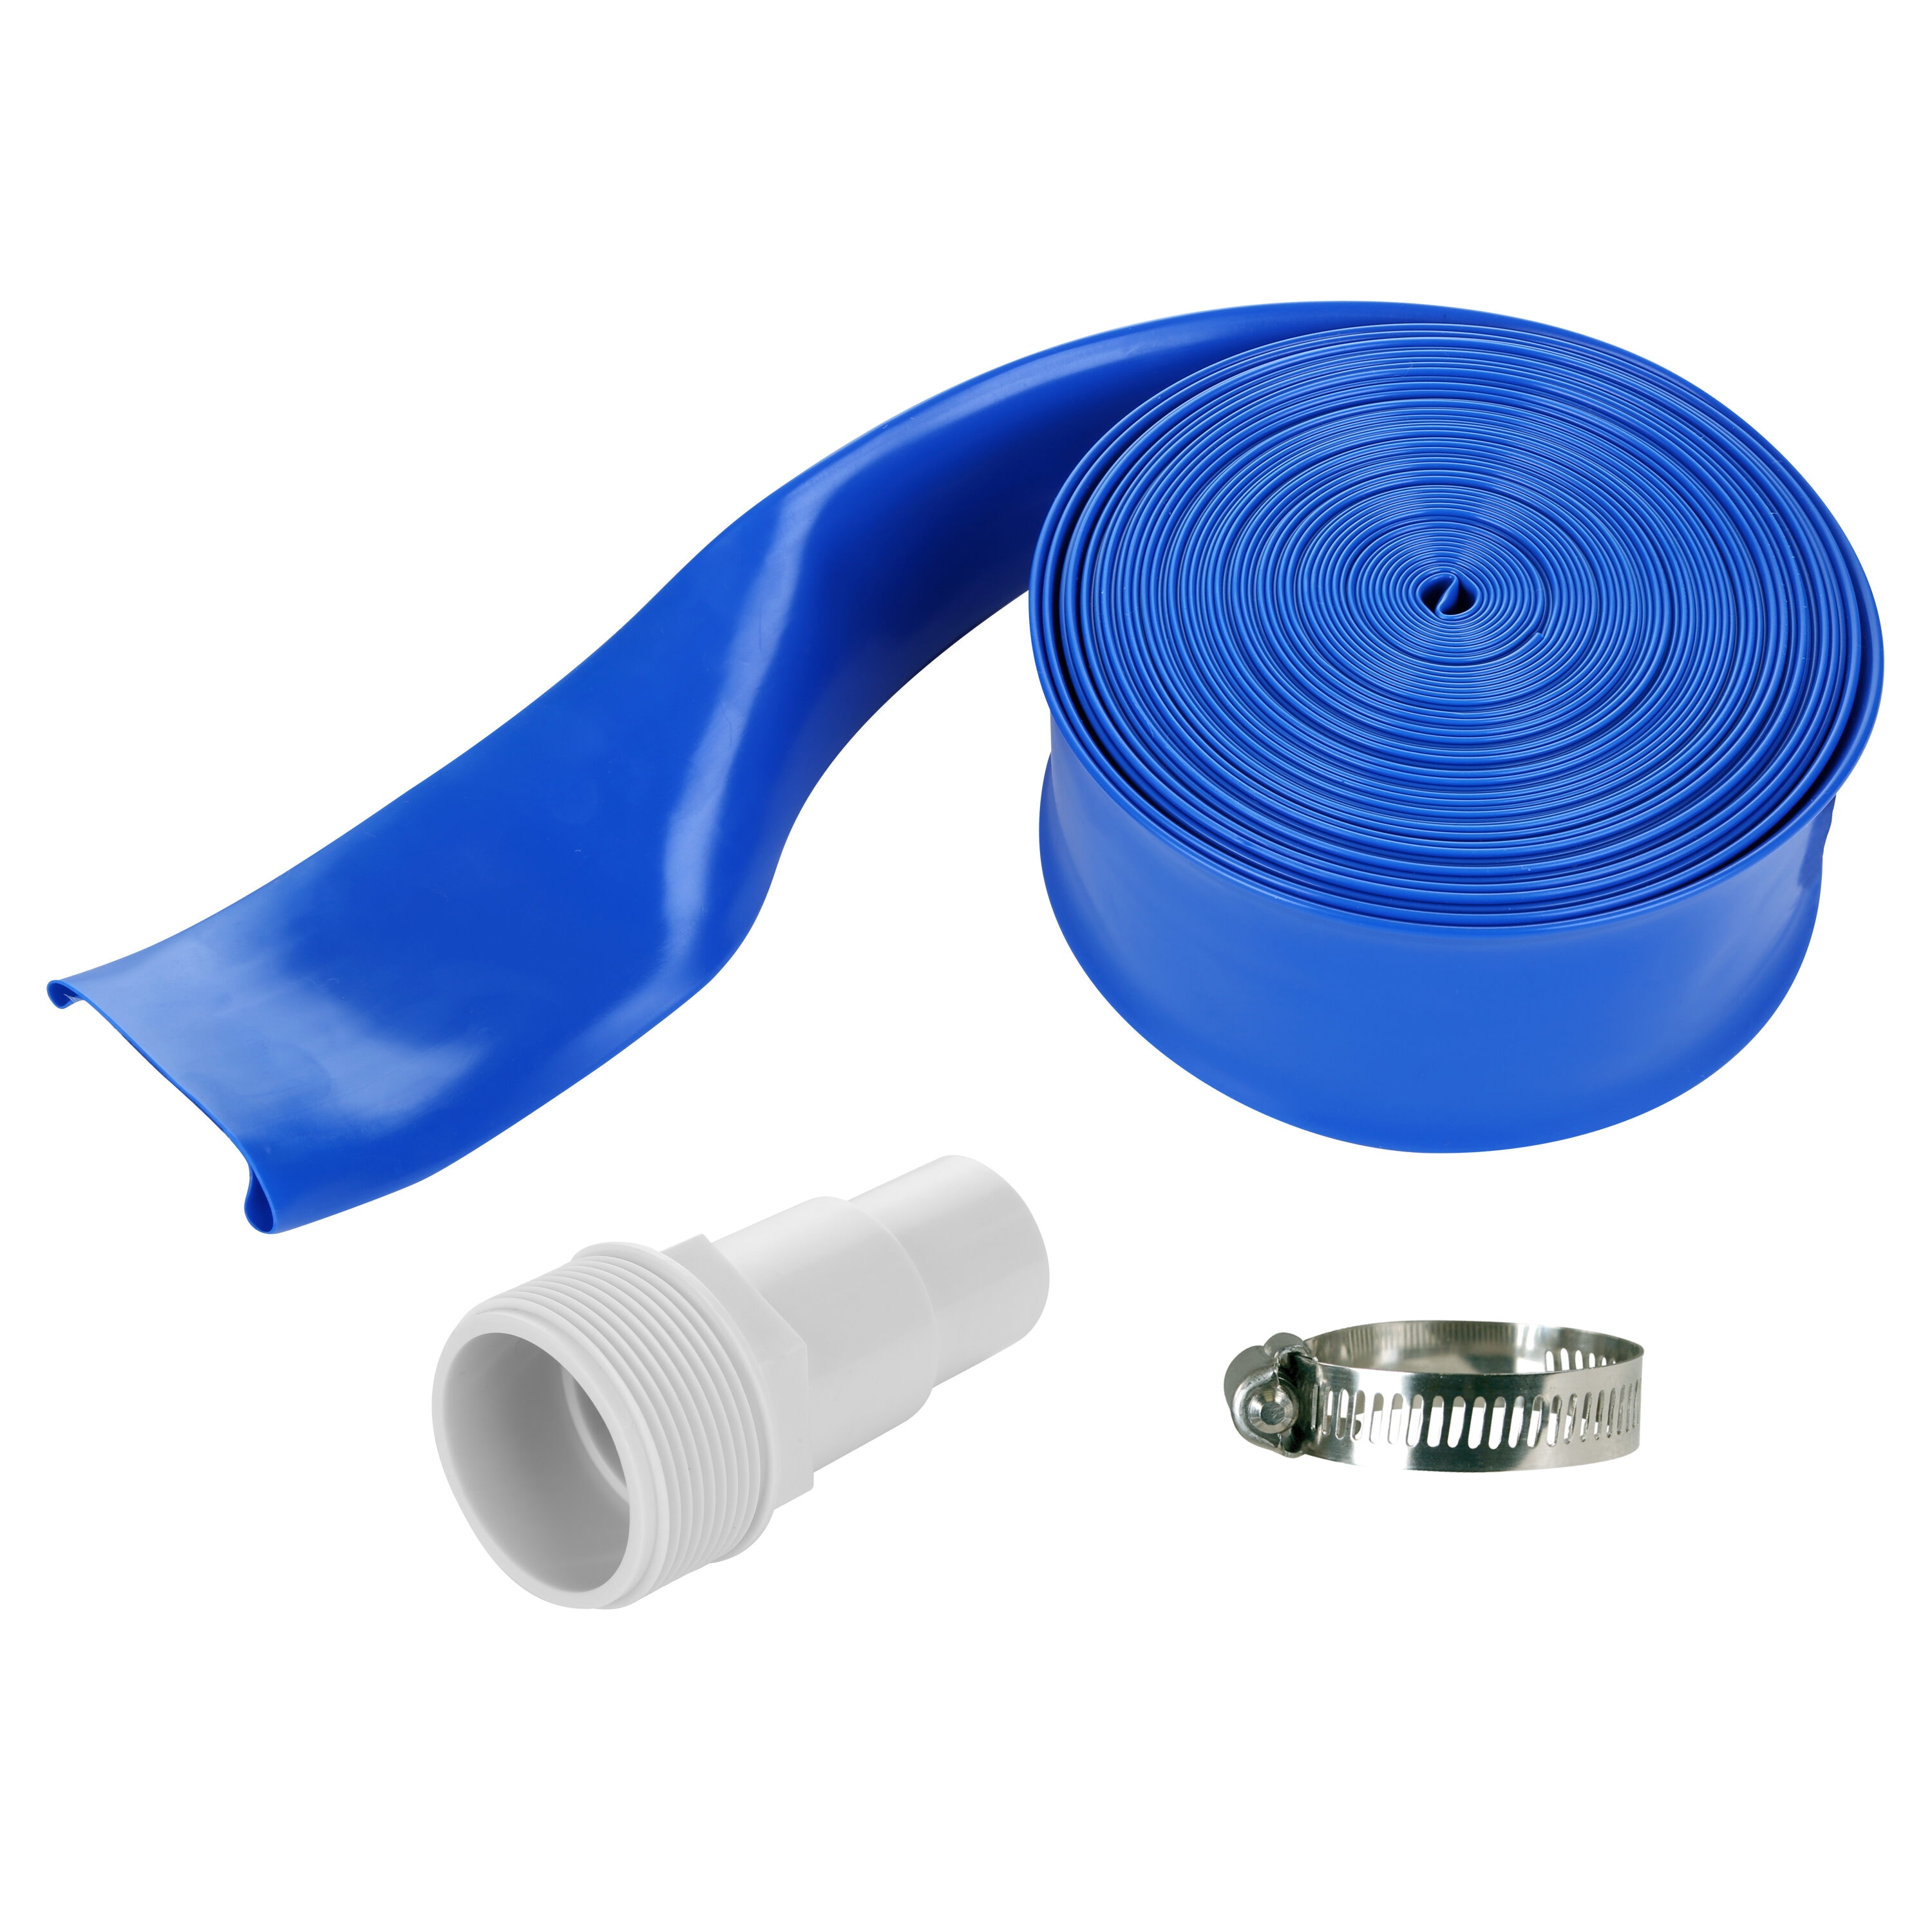 Mainstays 100' Backwash Hose with Stainless Steel Clamp, For pool